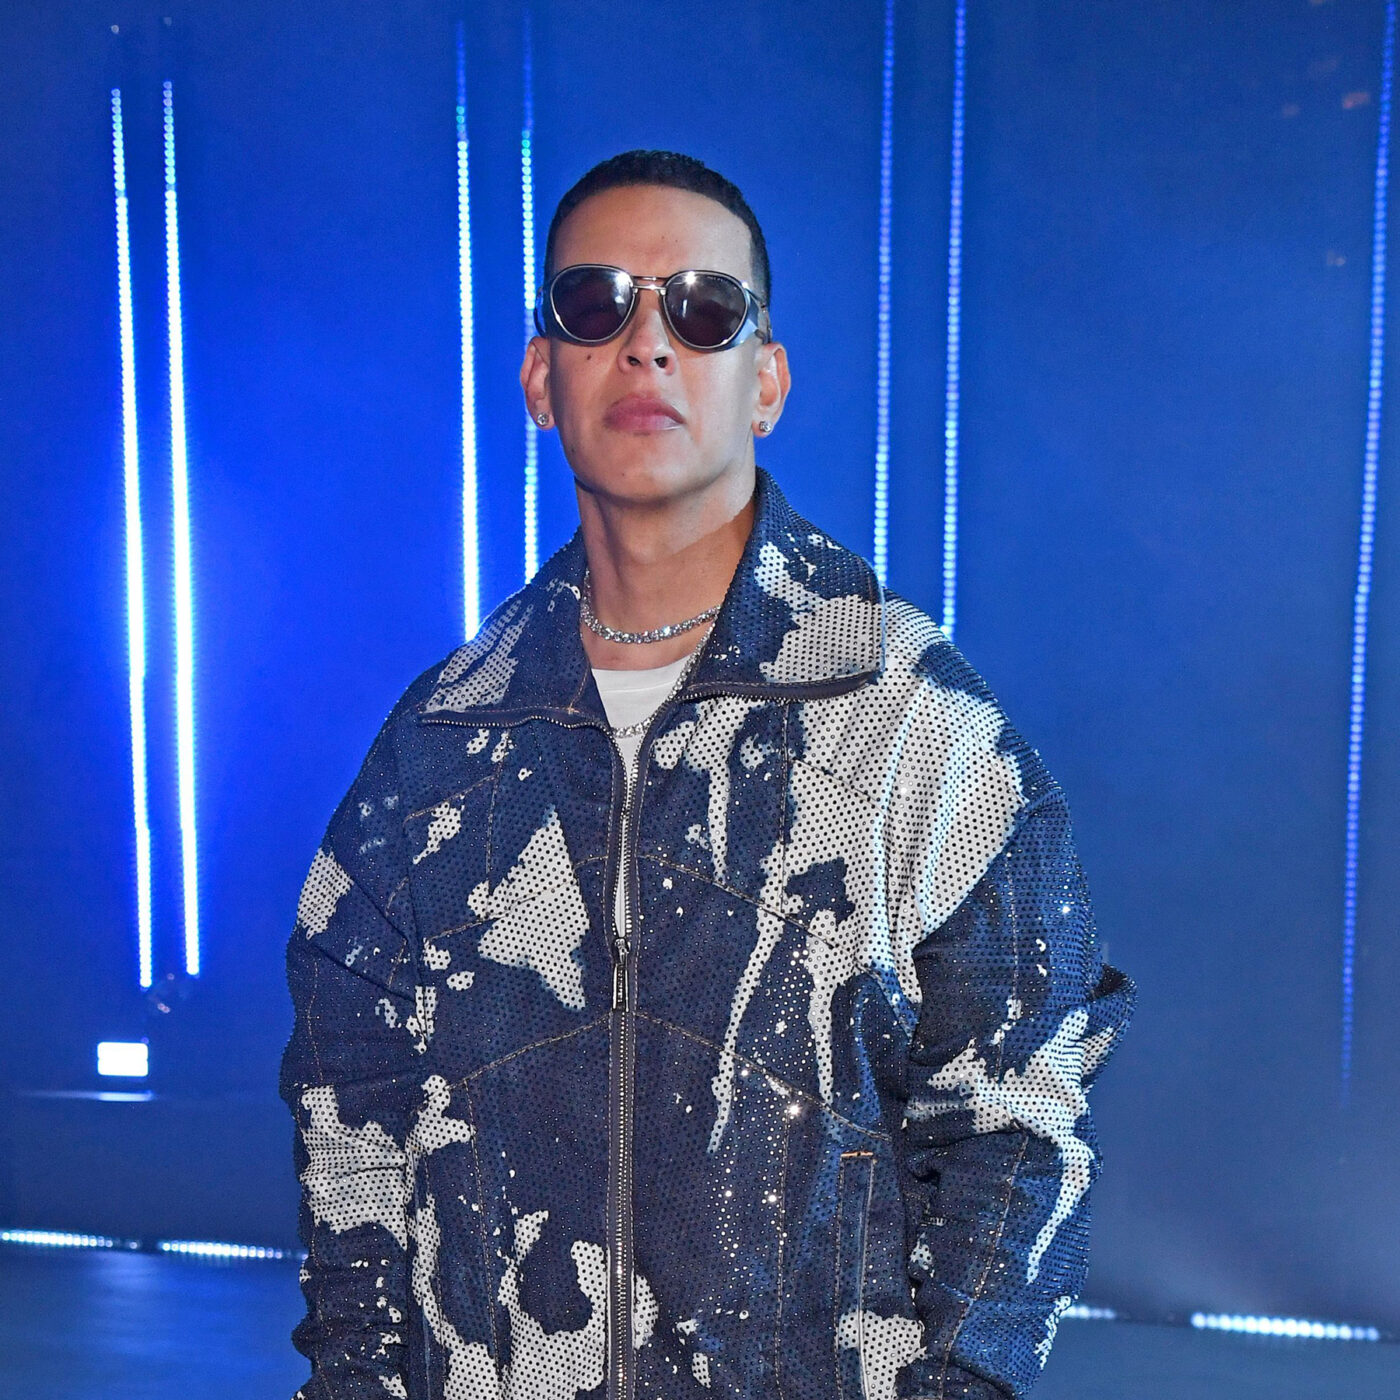 Daddy Yankee To Receive Legend Award From Hispanic Heritage Foundation